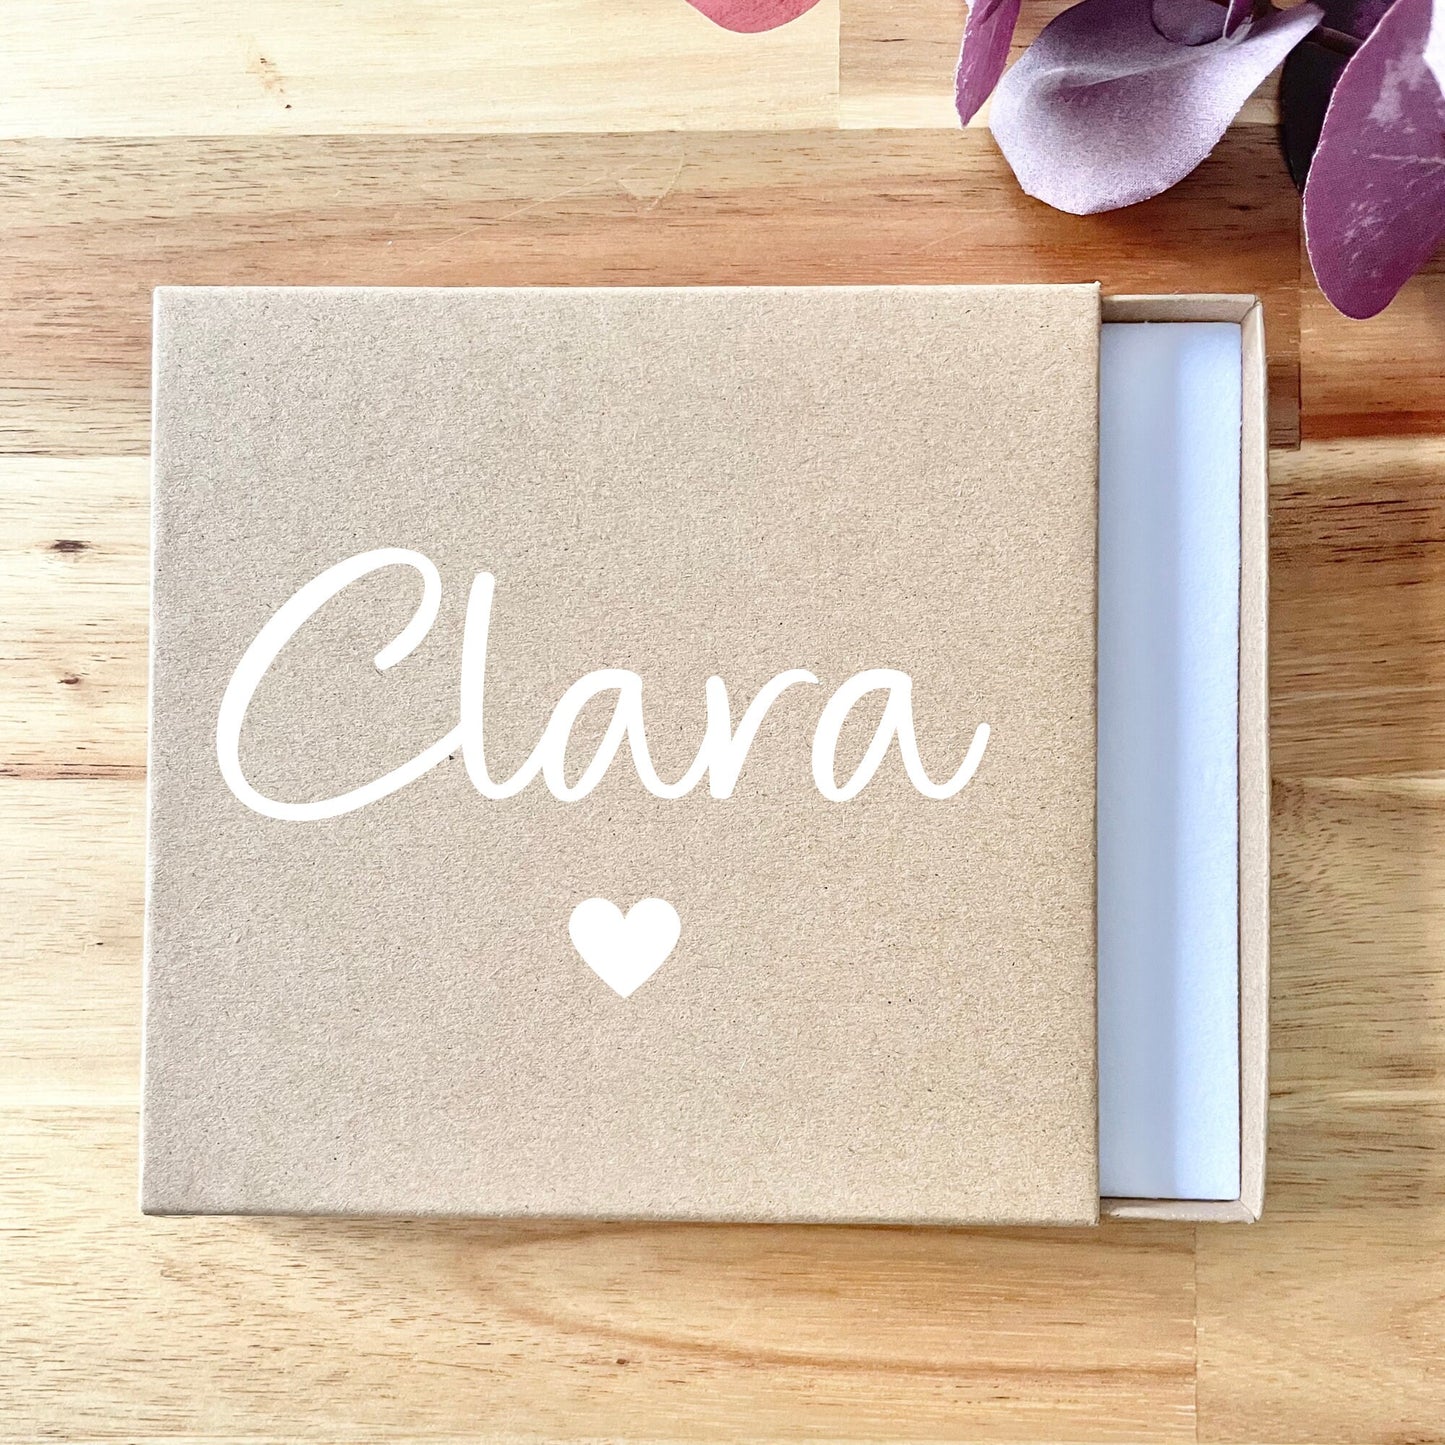 Personalised Jewellery Gift Box, bracelet box, Bridesmaid jewellery Gift, Custom Gift Box for bangle, earrings, watch for Bridal Party